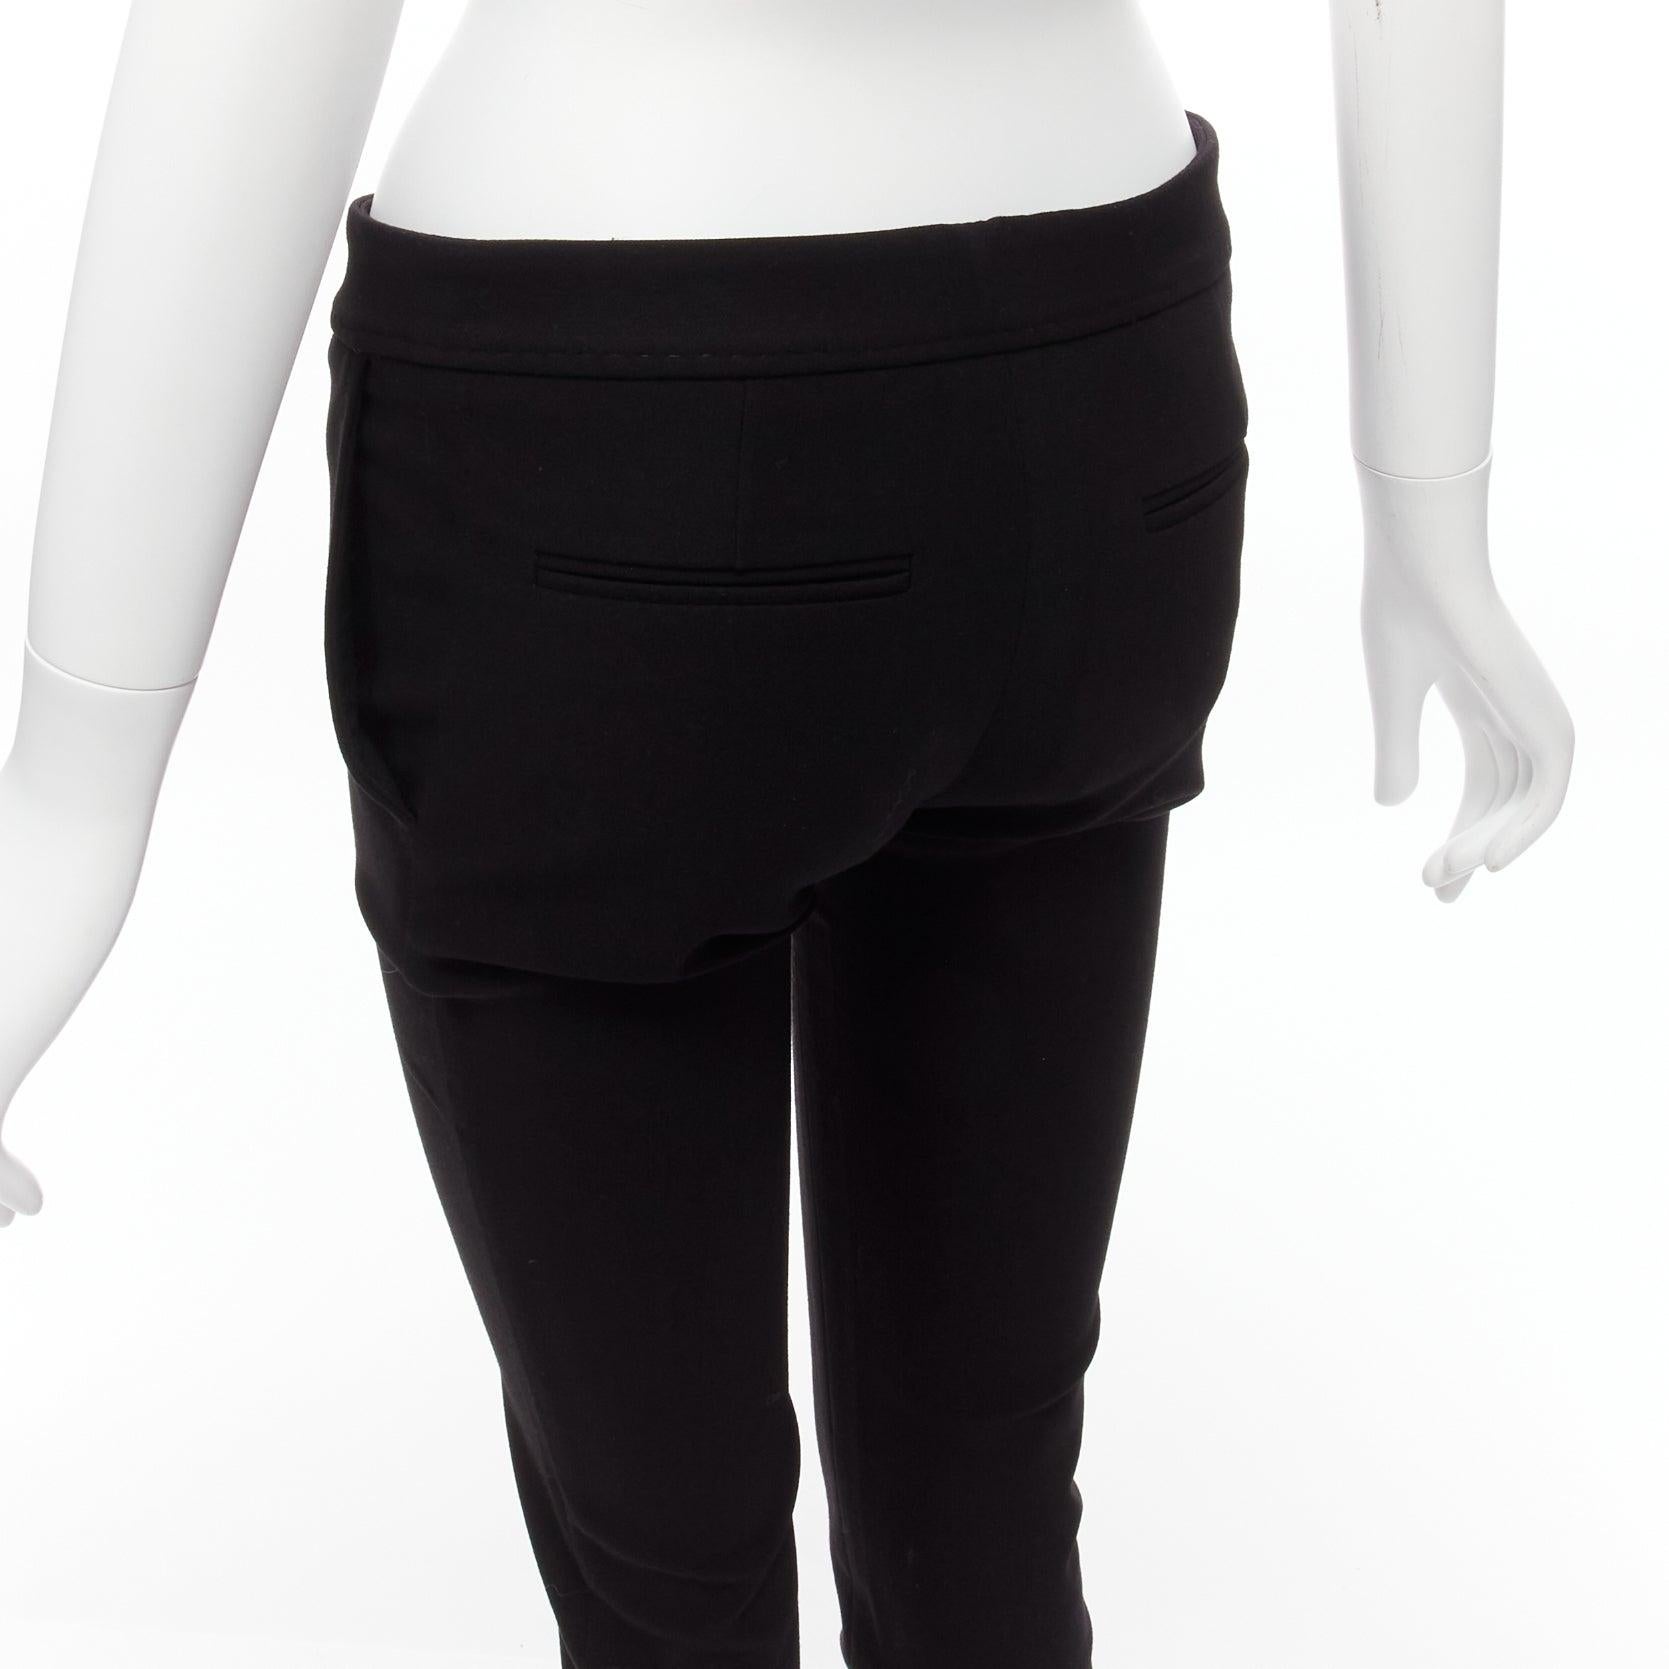 new STELLA MCCARTNEY black wool blend high waist back pocket cropped skinny pants IT36 XXS
Reference: SNKO/A00289
Brand: Stella McCartney
Material: Wool, Blend
Color: Black
Pattern: Solid
Closure: Zip Fly
Extra Details: Back pockets.
Made in: